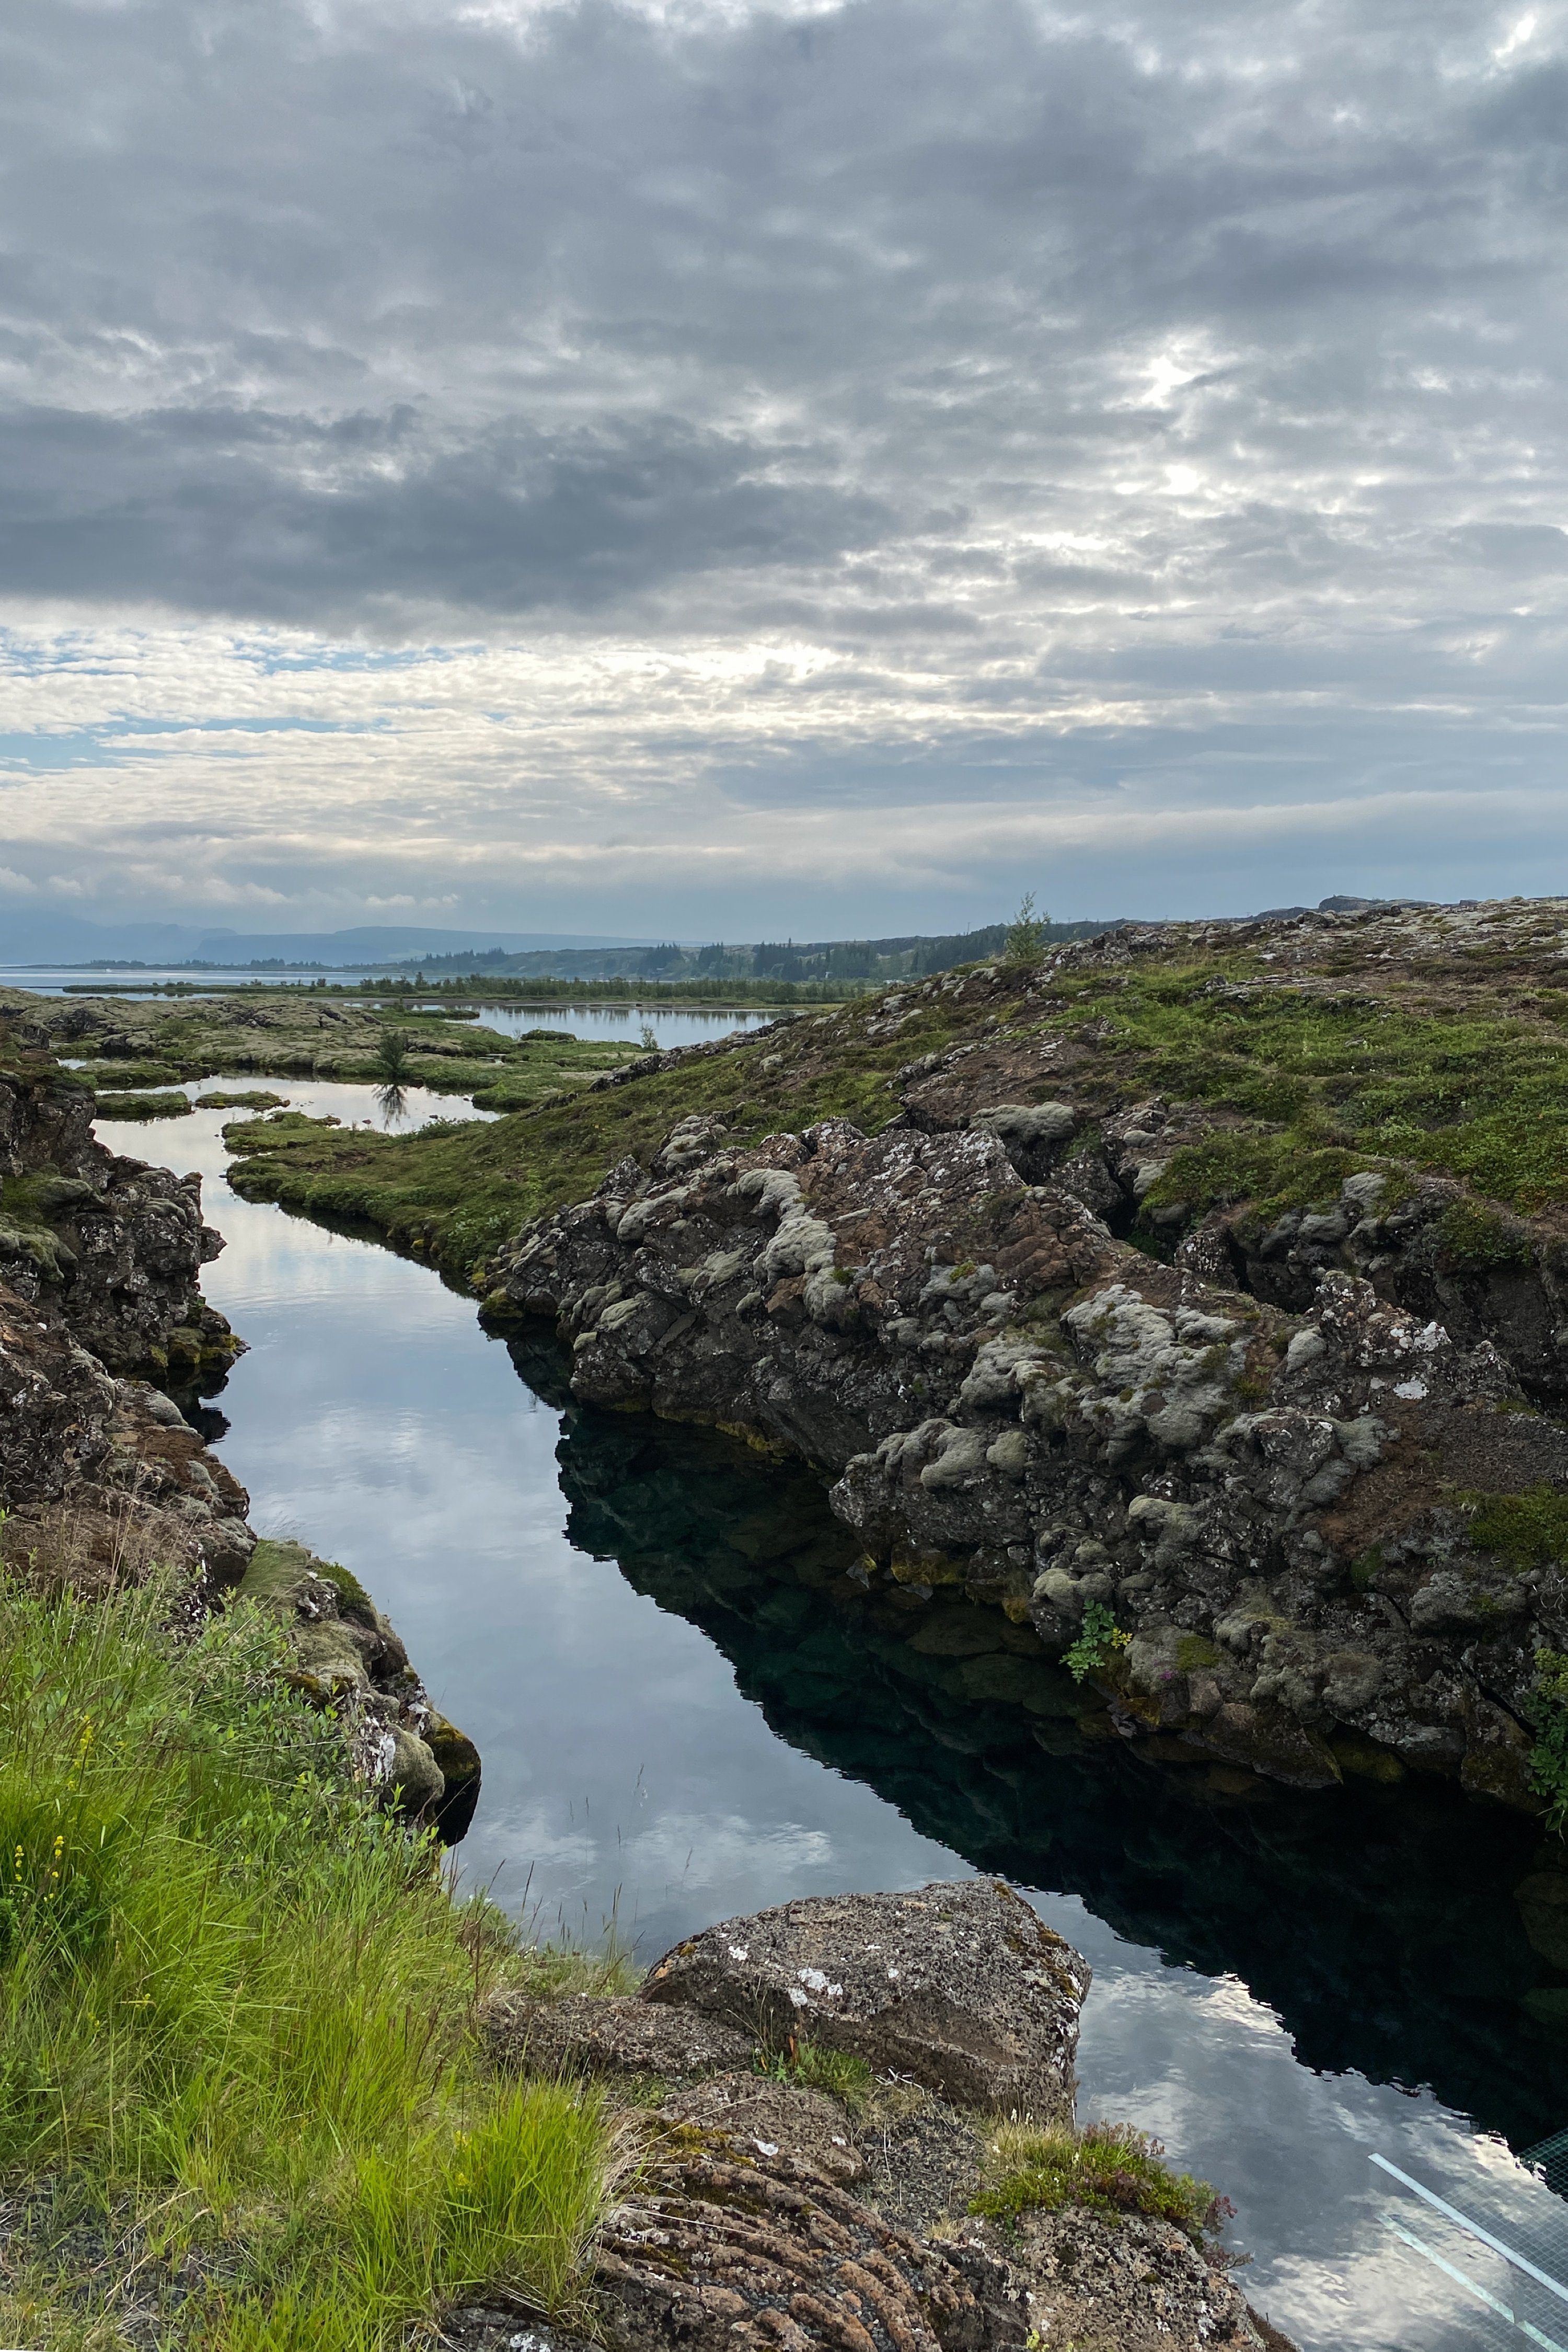 Snorkeling between tectonic plates in Silfra: Here the water is a frigid 2 degrees Celsius all year round. (dpa Photo)